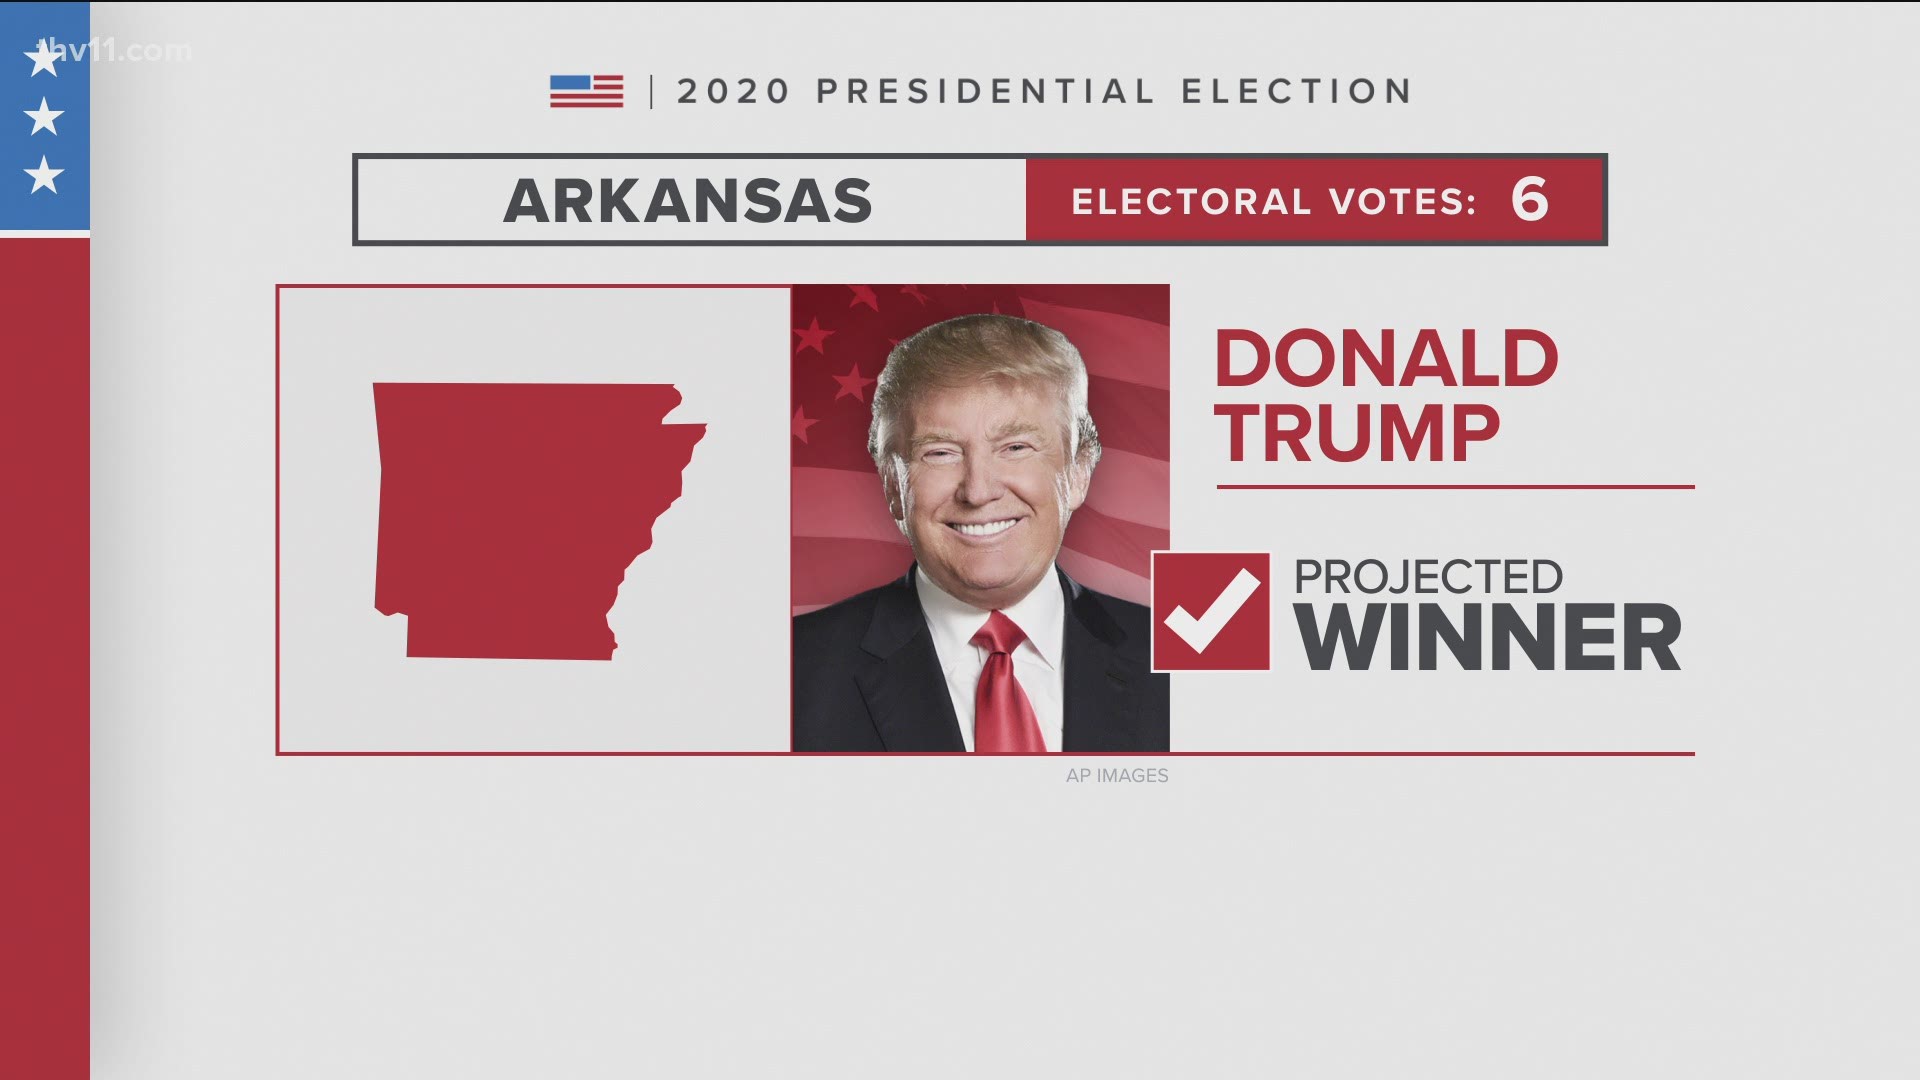 President Donald Trump is the projected winner of Arkansas. He gains six electoral votes from the state.